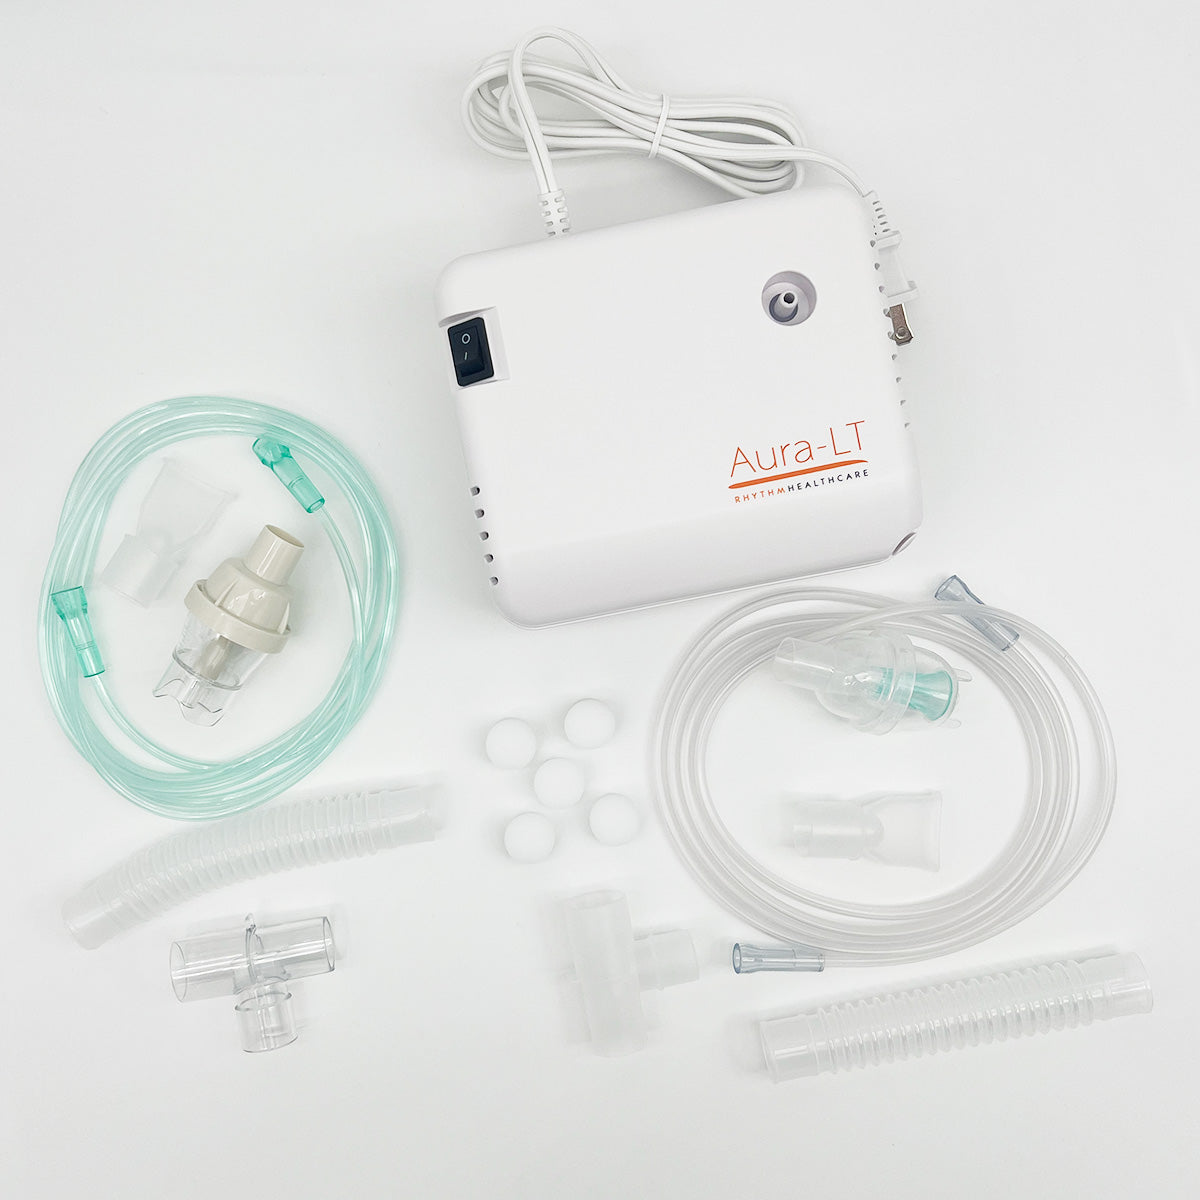 Aura-LT Compressor Kit with Reusable & Disposable Nebulizers